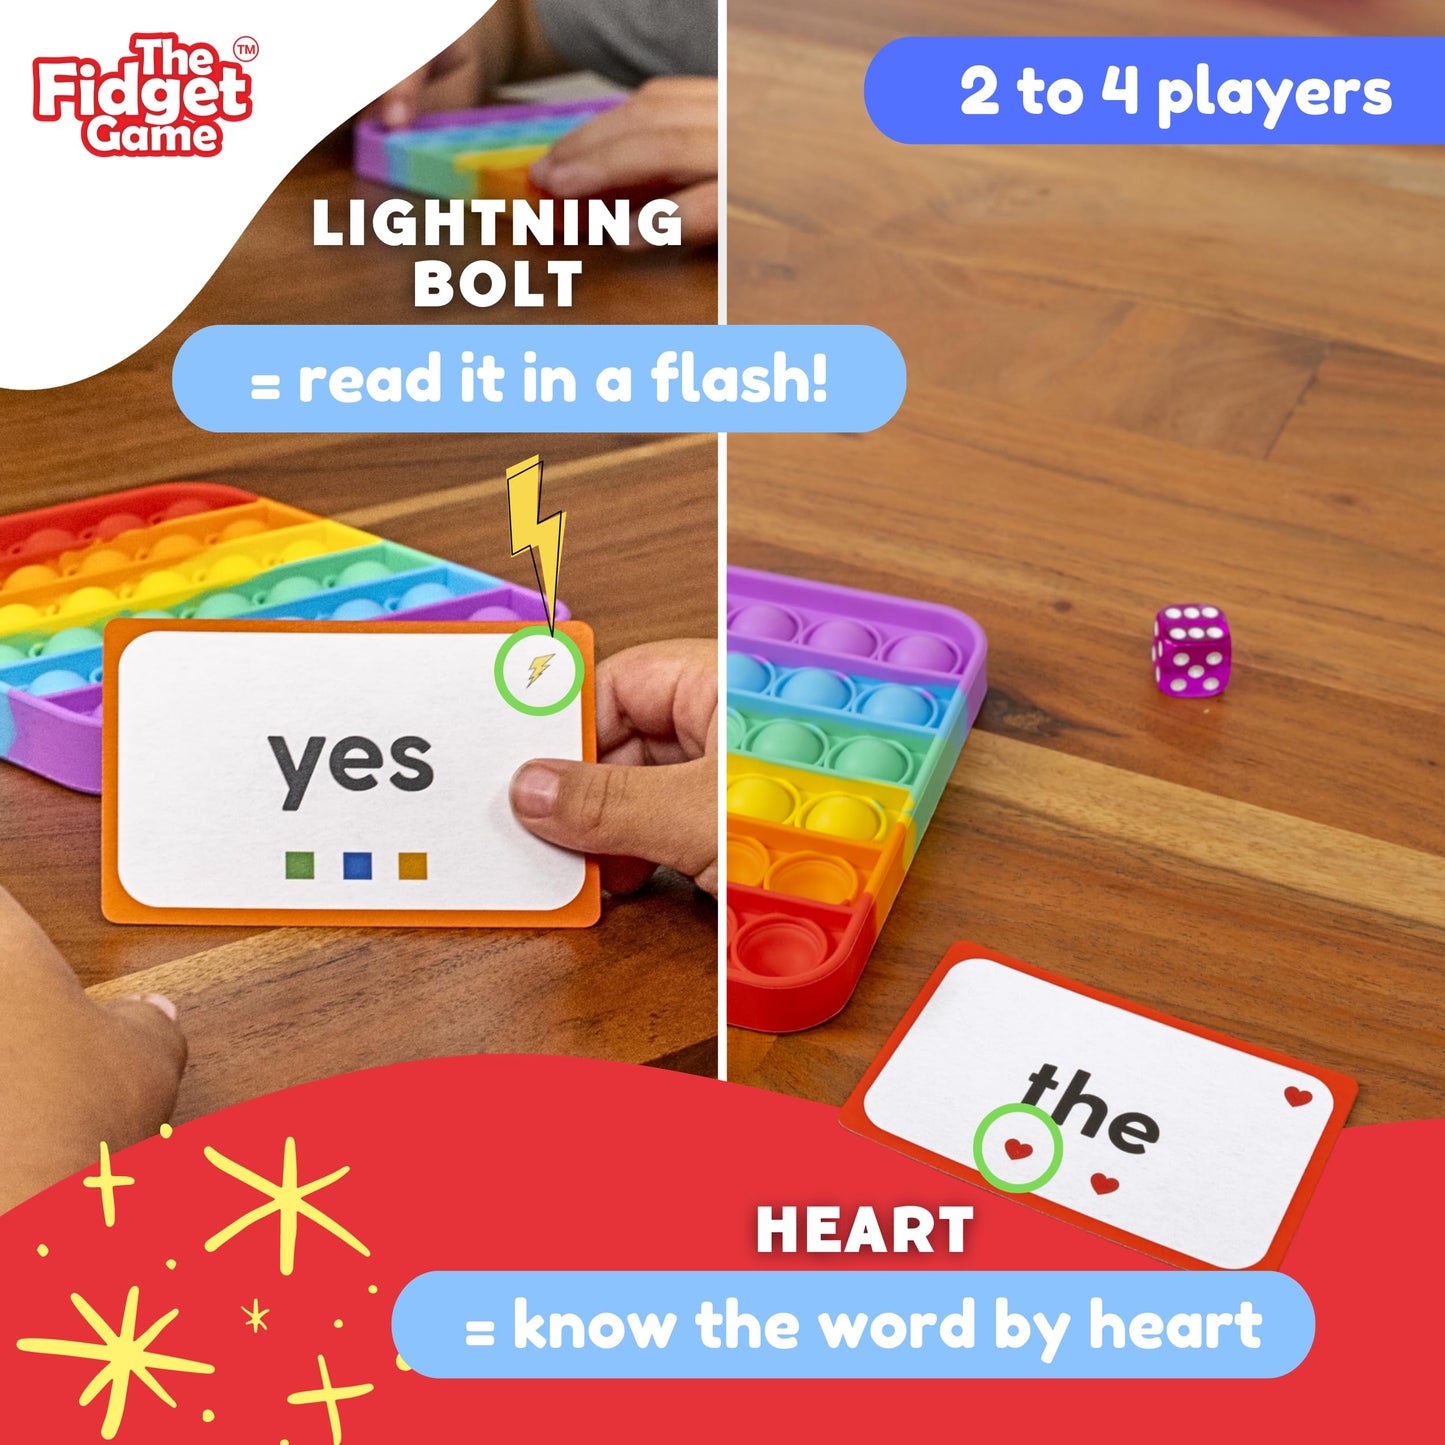 The Fidget Game Learn to Read in Weeks Master 220 High-Frequency Dolch Sight Words Curriculum-Appropriate for Pre-K to Grade 3 - Popping Mats & Dice - Word Pop - Sight Word - Reading Game - Word Game